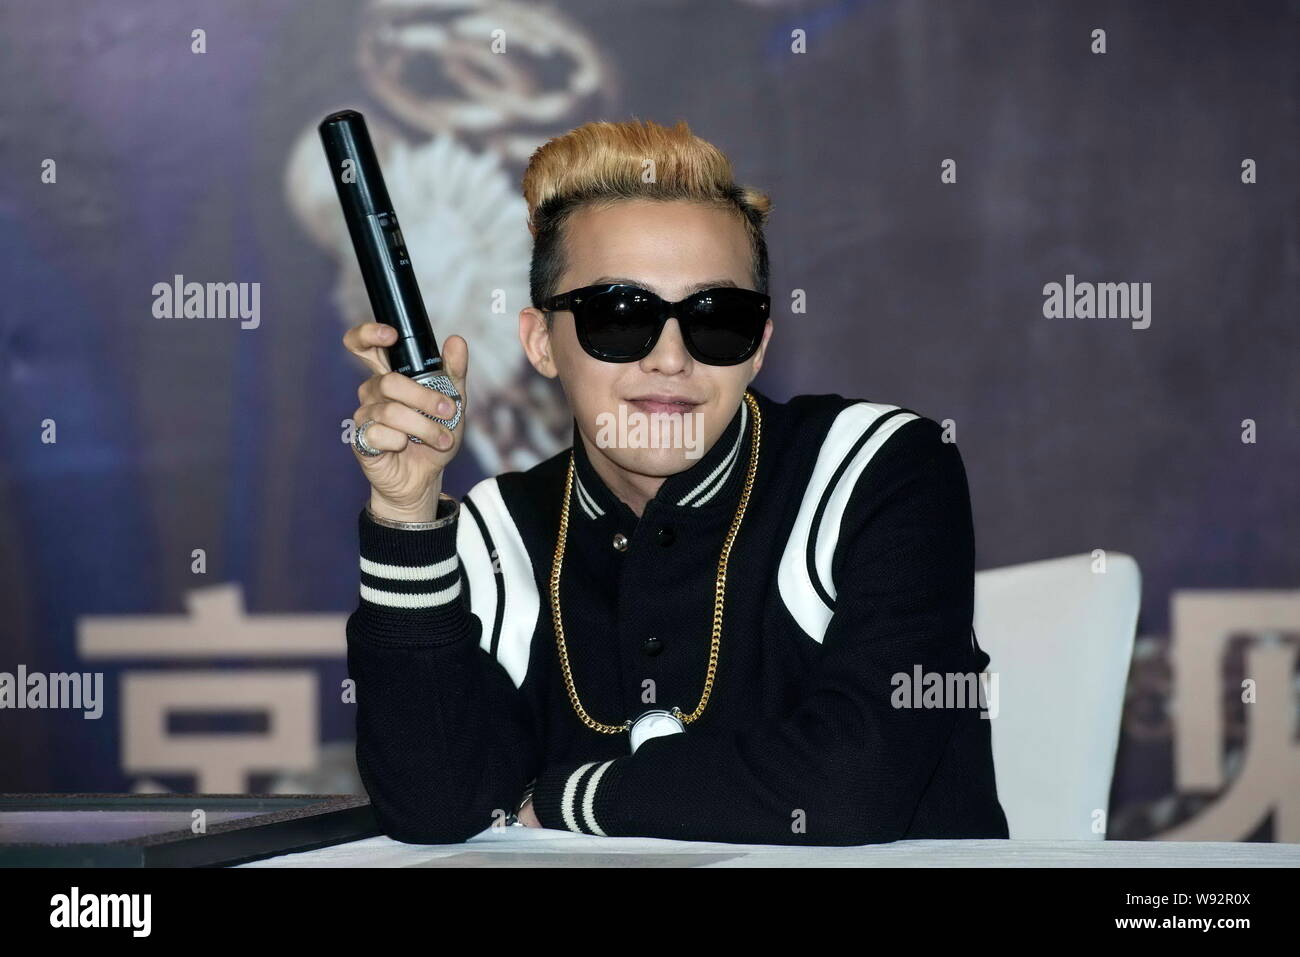 Korean Singer G Dragon Better Known As Gd Of The Korean Pop Group Bigbang Smiles During A Press Conference For His Solo Concert One Of A Kind In Be Stock Photo Alamy